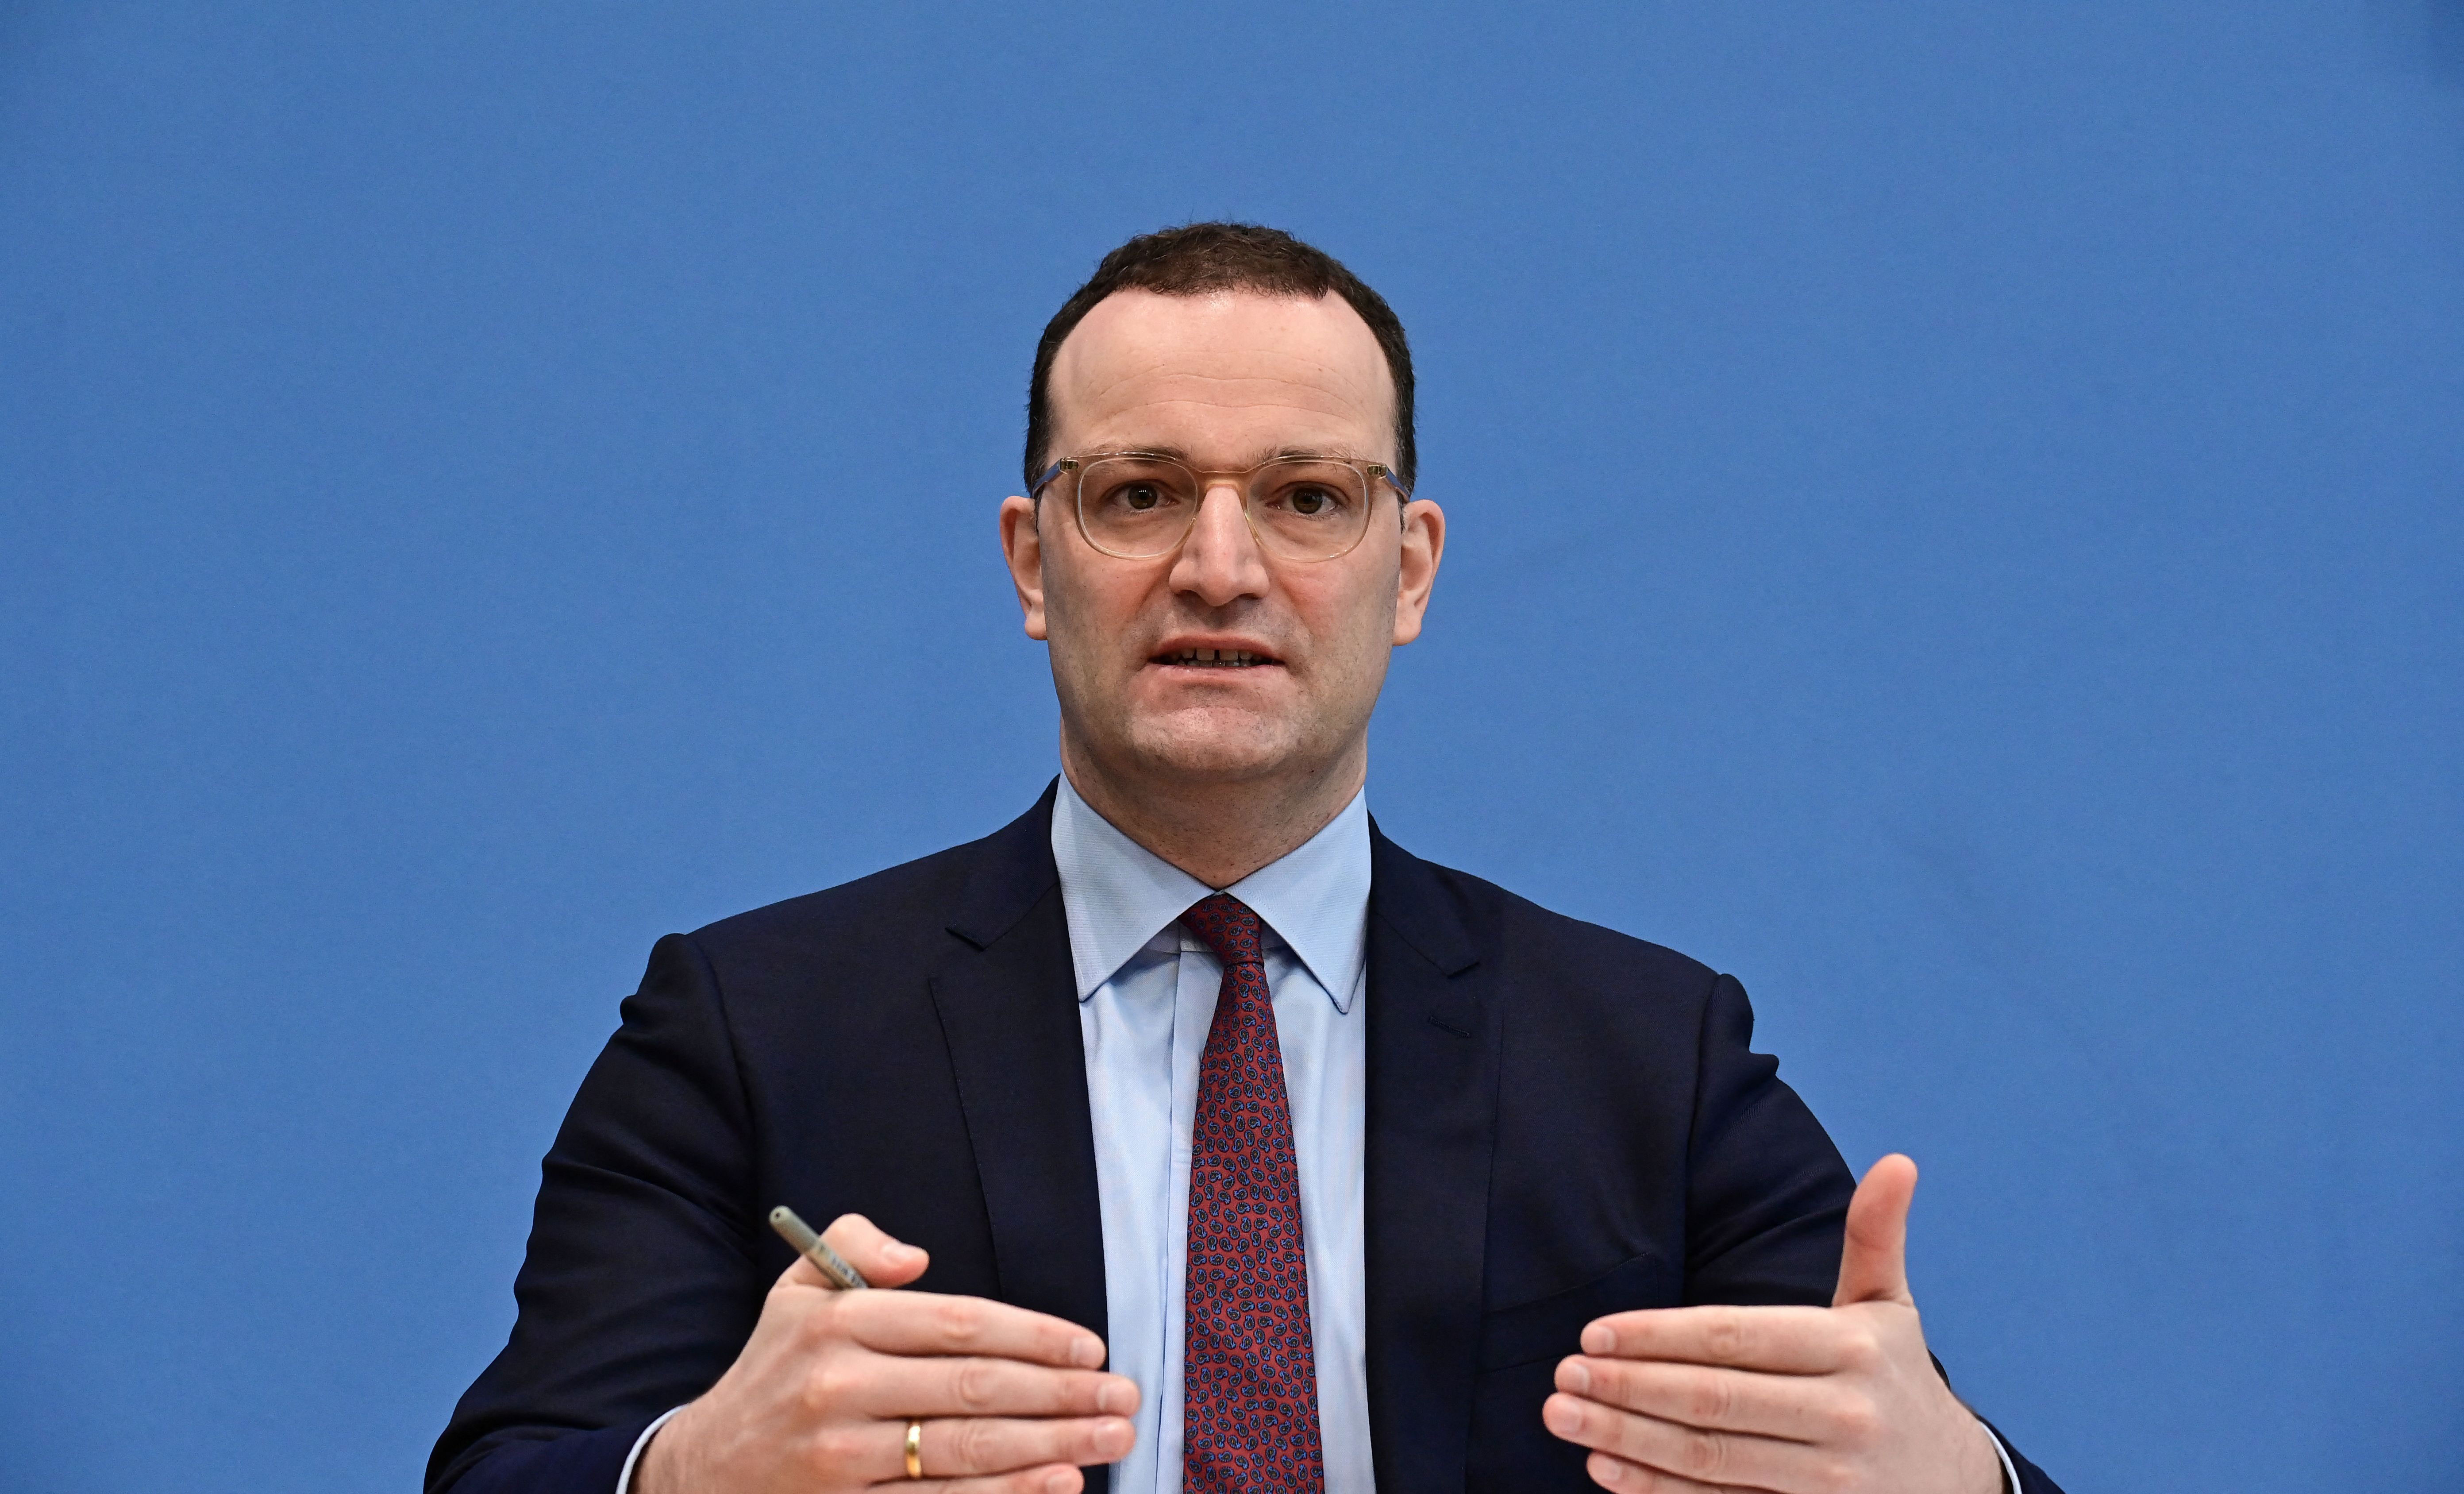 Germany's Health Minister Jens Spahn speaks at a press conference in Berlin on November 26.